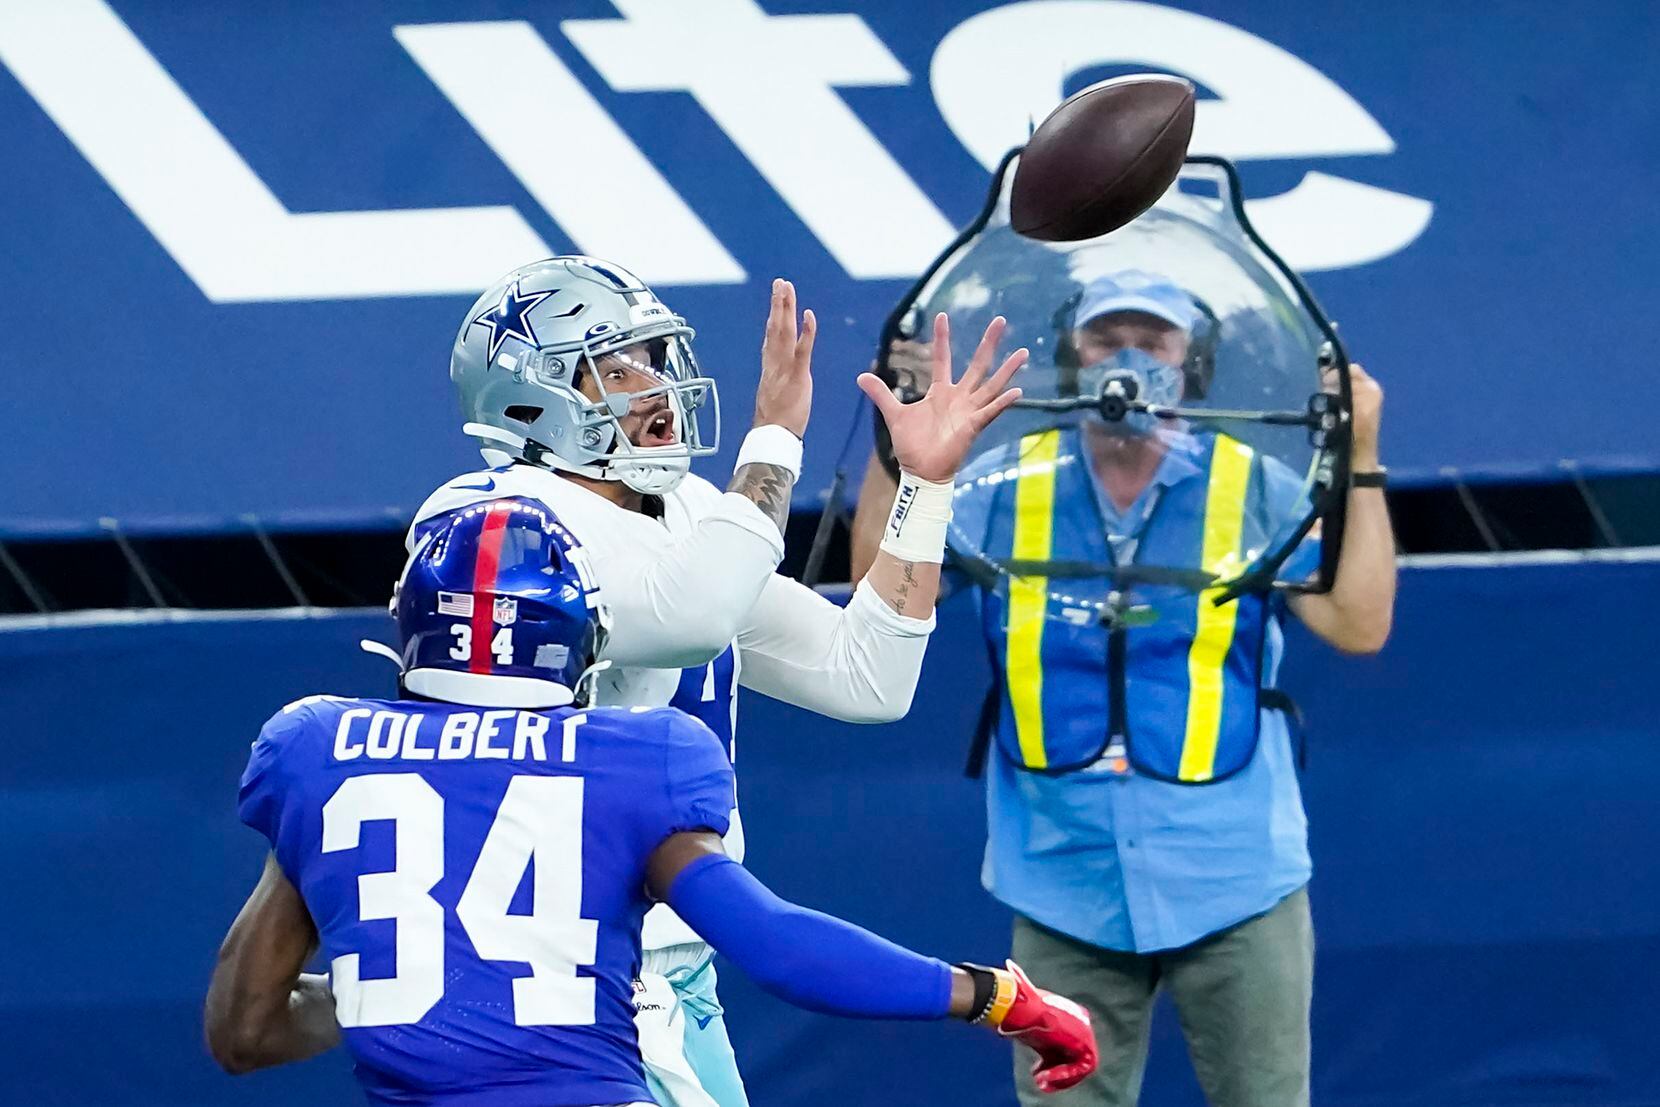 Dallas Cowboys quarterback Dak Prescott (4) catches a touchdown pass from wide receiver Ced Wilson past New York Giants safety Adrian Colbert (34) during the second quarter of an NFL football game at AT&T Stadium on Sunday, Oct. 11, 2020, in Arlington. (Smiley N. Pool/The Dallas Morning News)